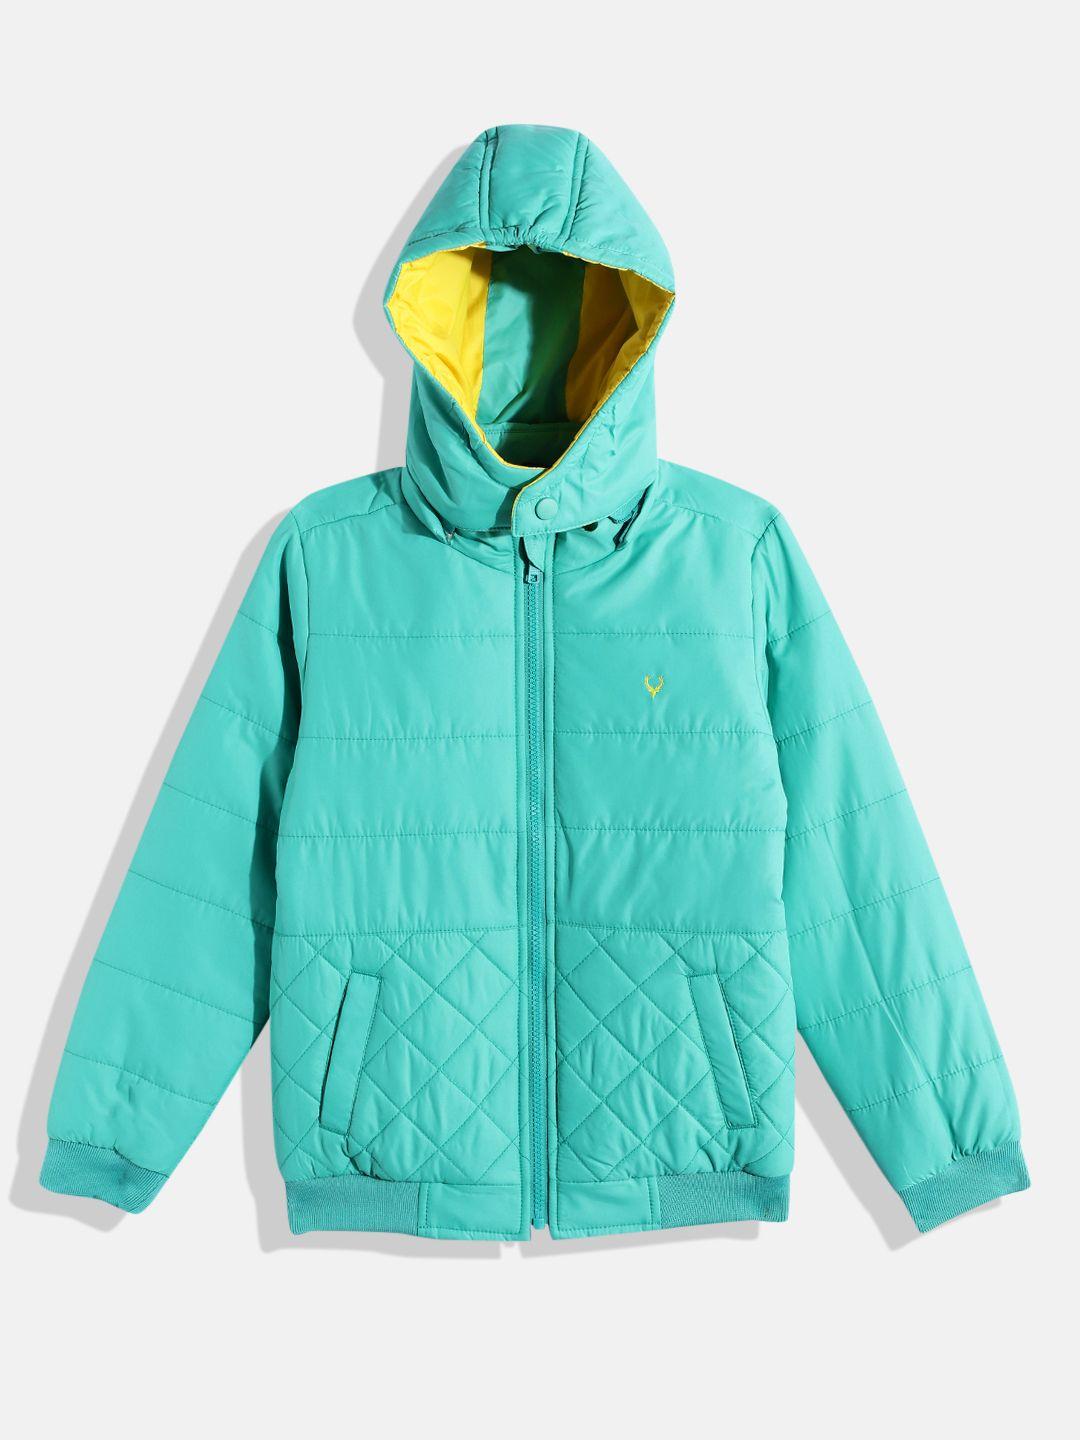 allen solly junior boys turquoise blue solid hooded bomber jacket